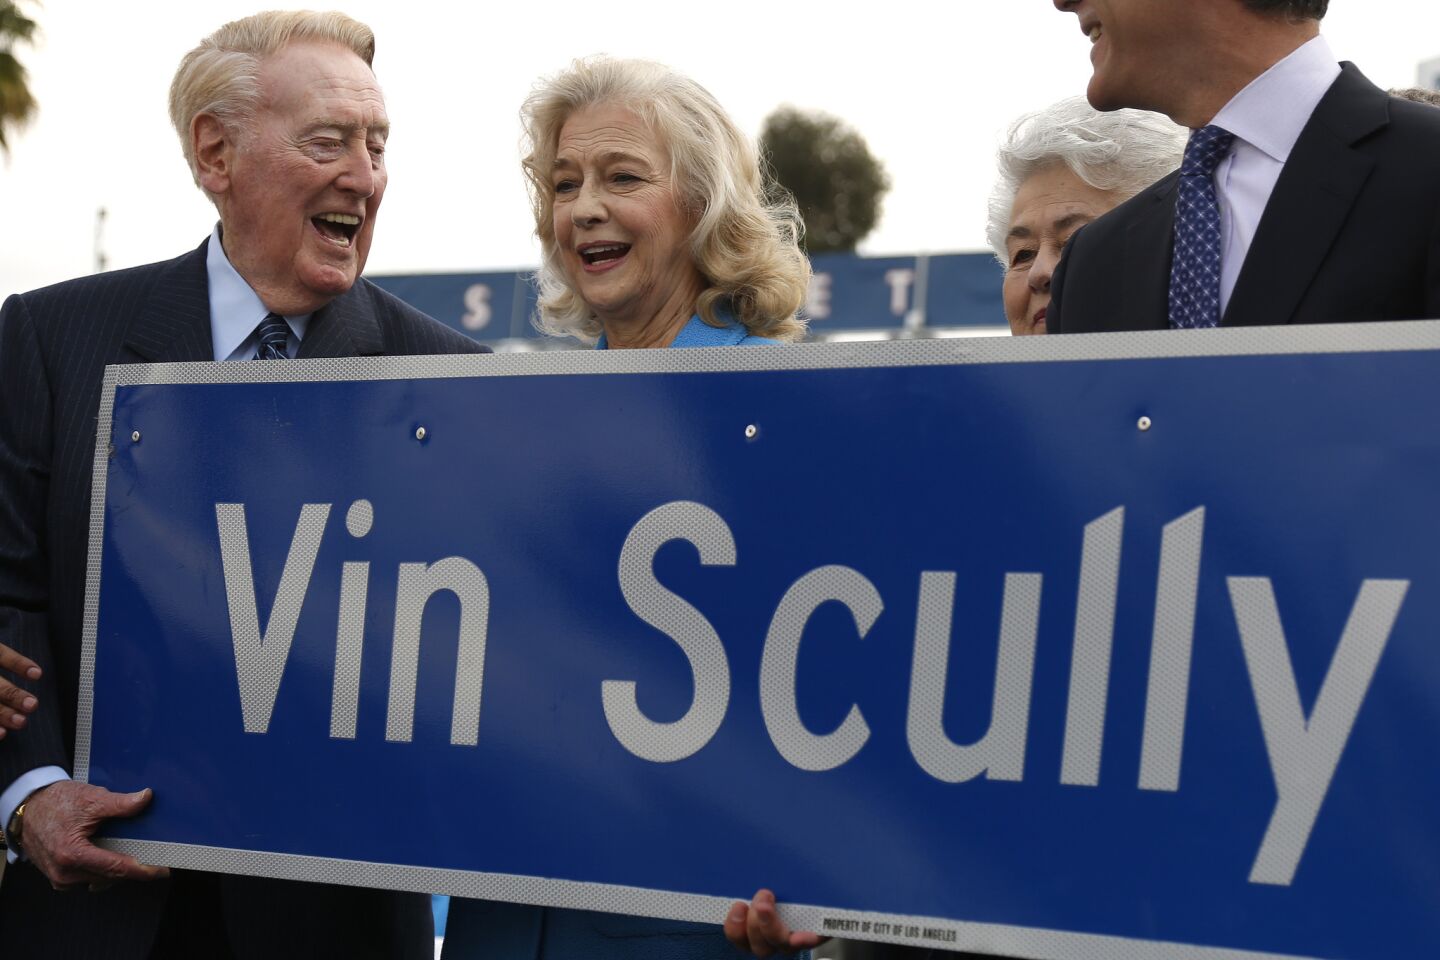 Vin Scully and his wife, Sandra Hunt, help hold a new Vin Scully Avenue sign during a ceremony renaming a street leading into Dodger Stadium.